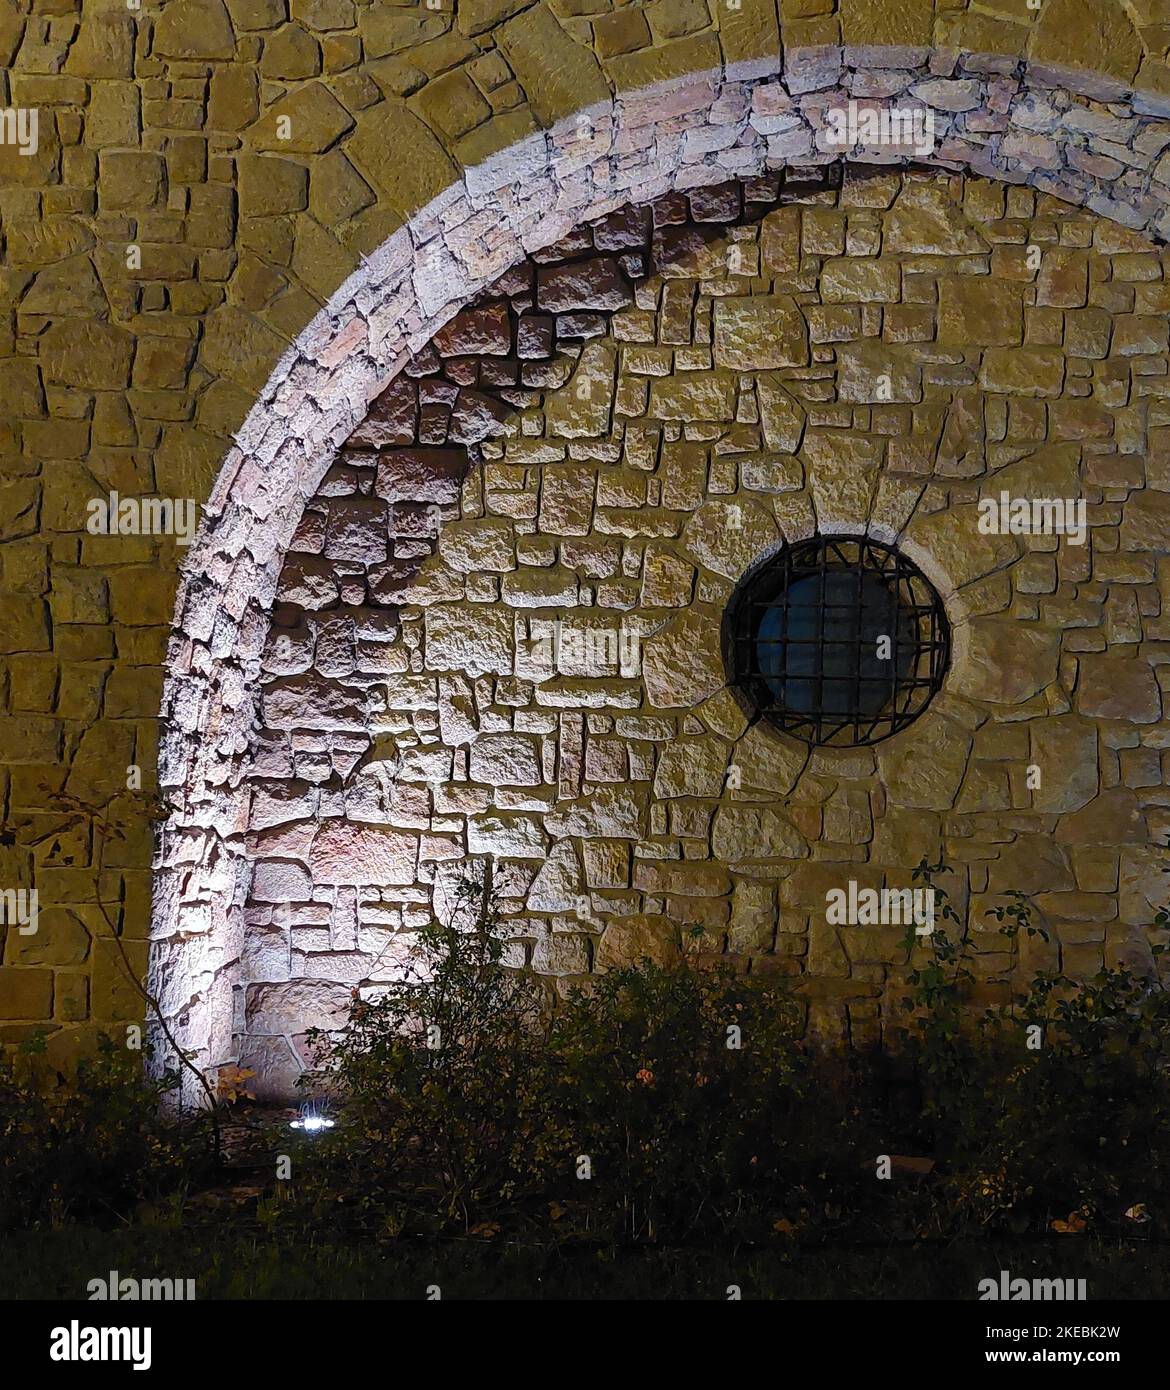 Round window with stone wall arch. Evening lighting Stock Photo